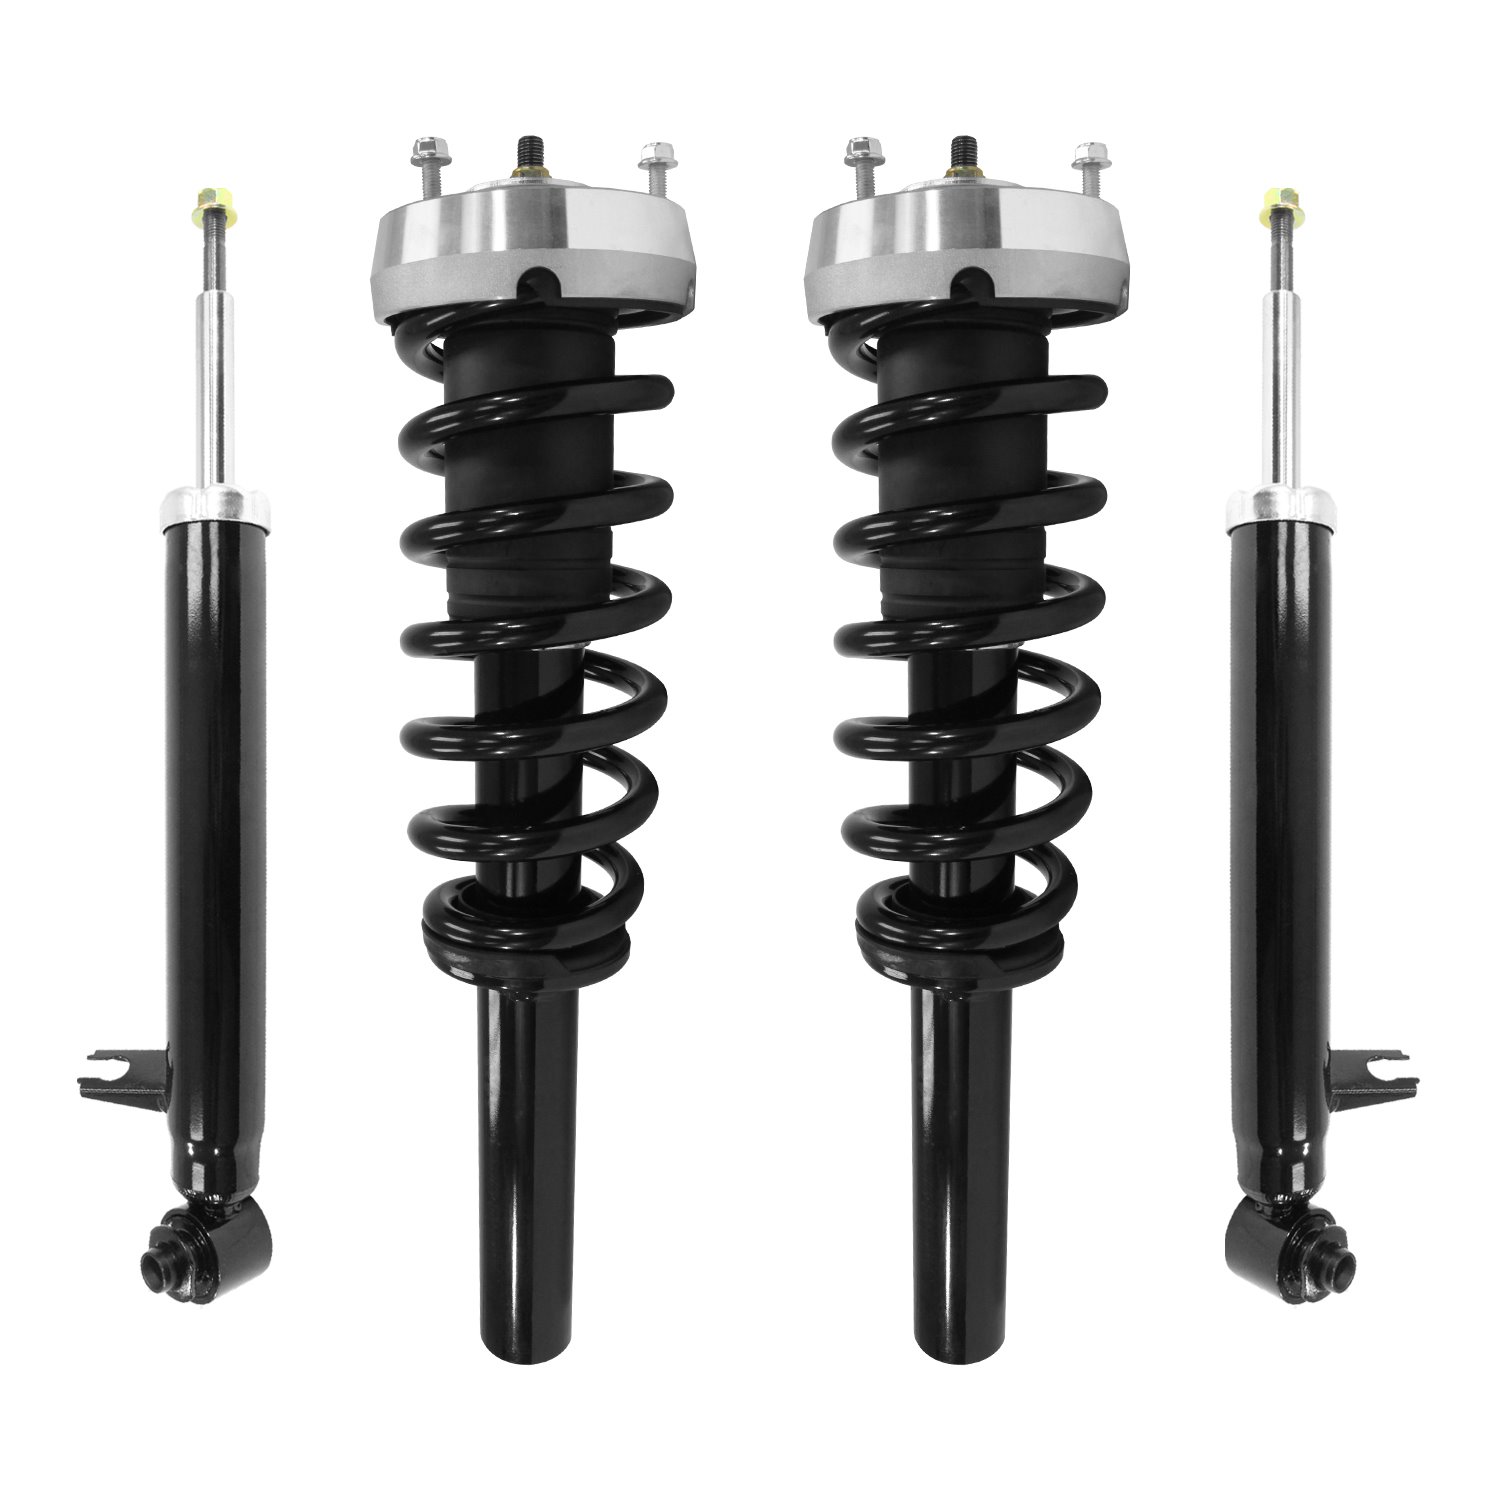 4-11425-257121-001 Front & Rear Suspension Strut & Coil Spring Assembly Fits Select BMW X5, BMW X6